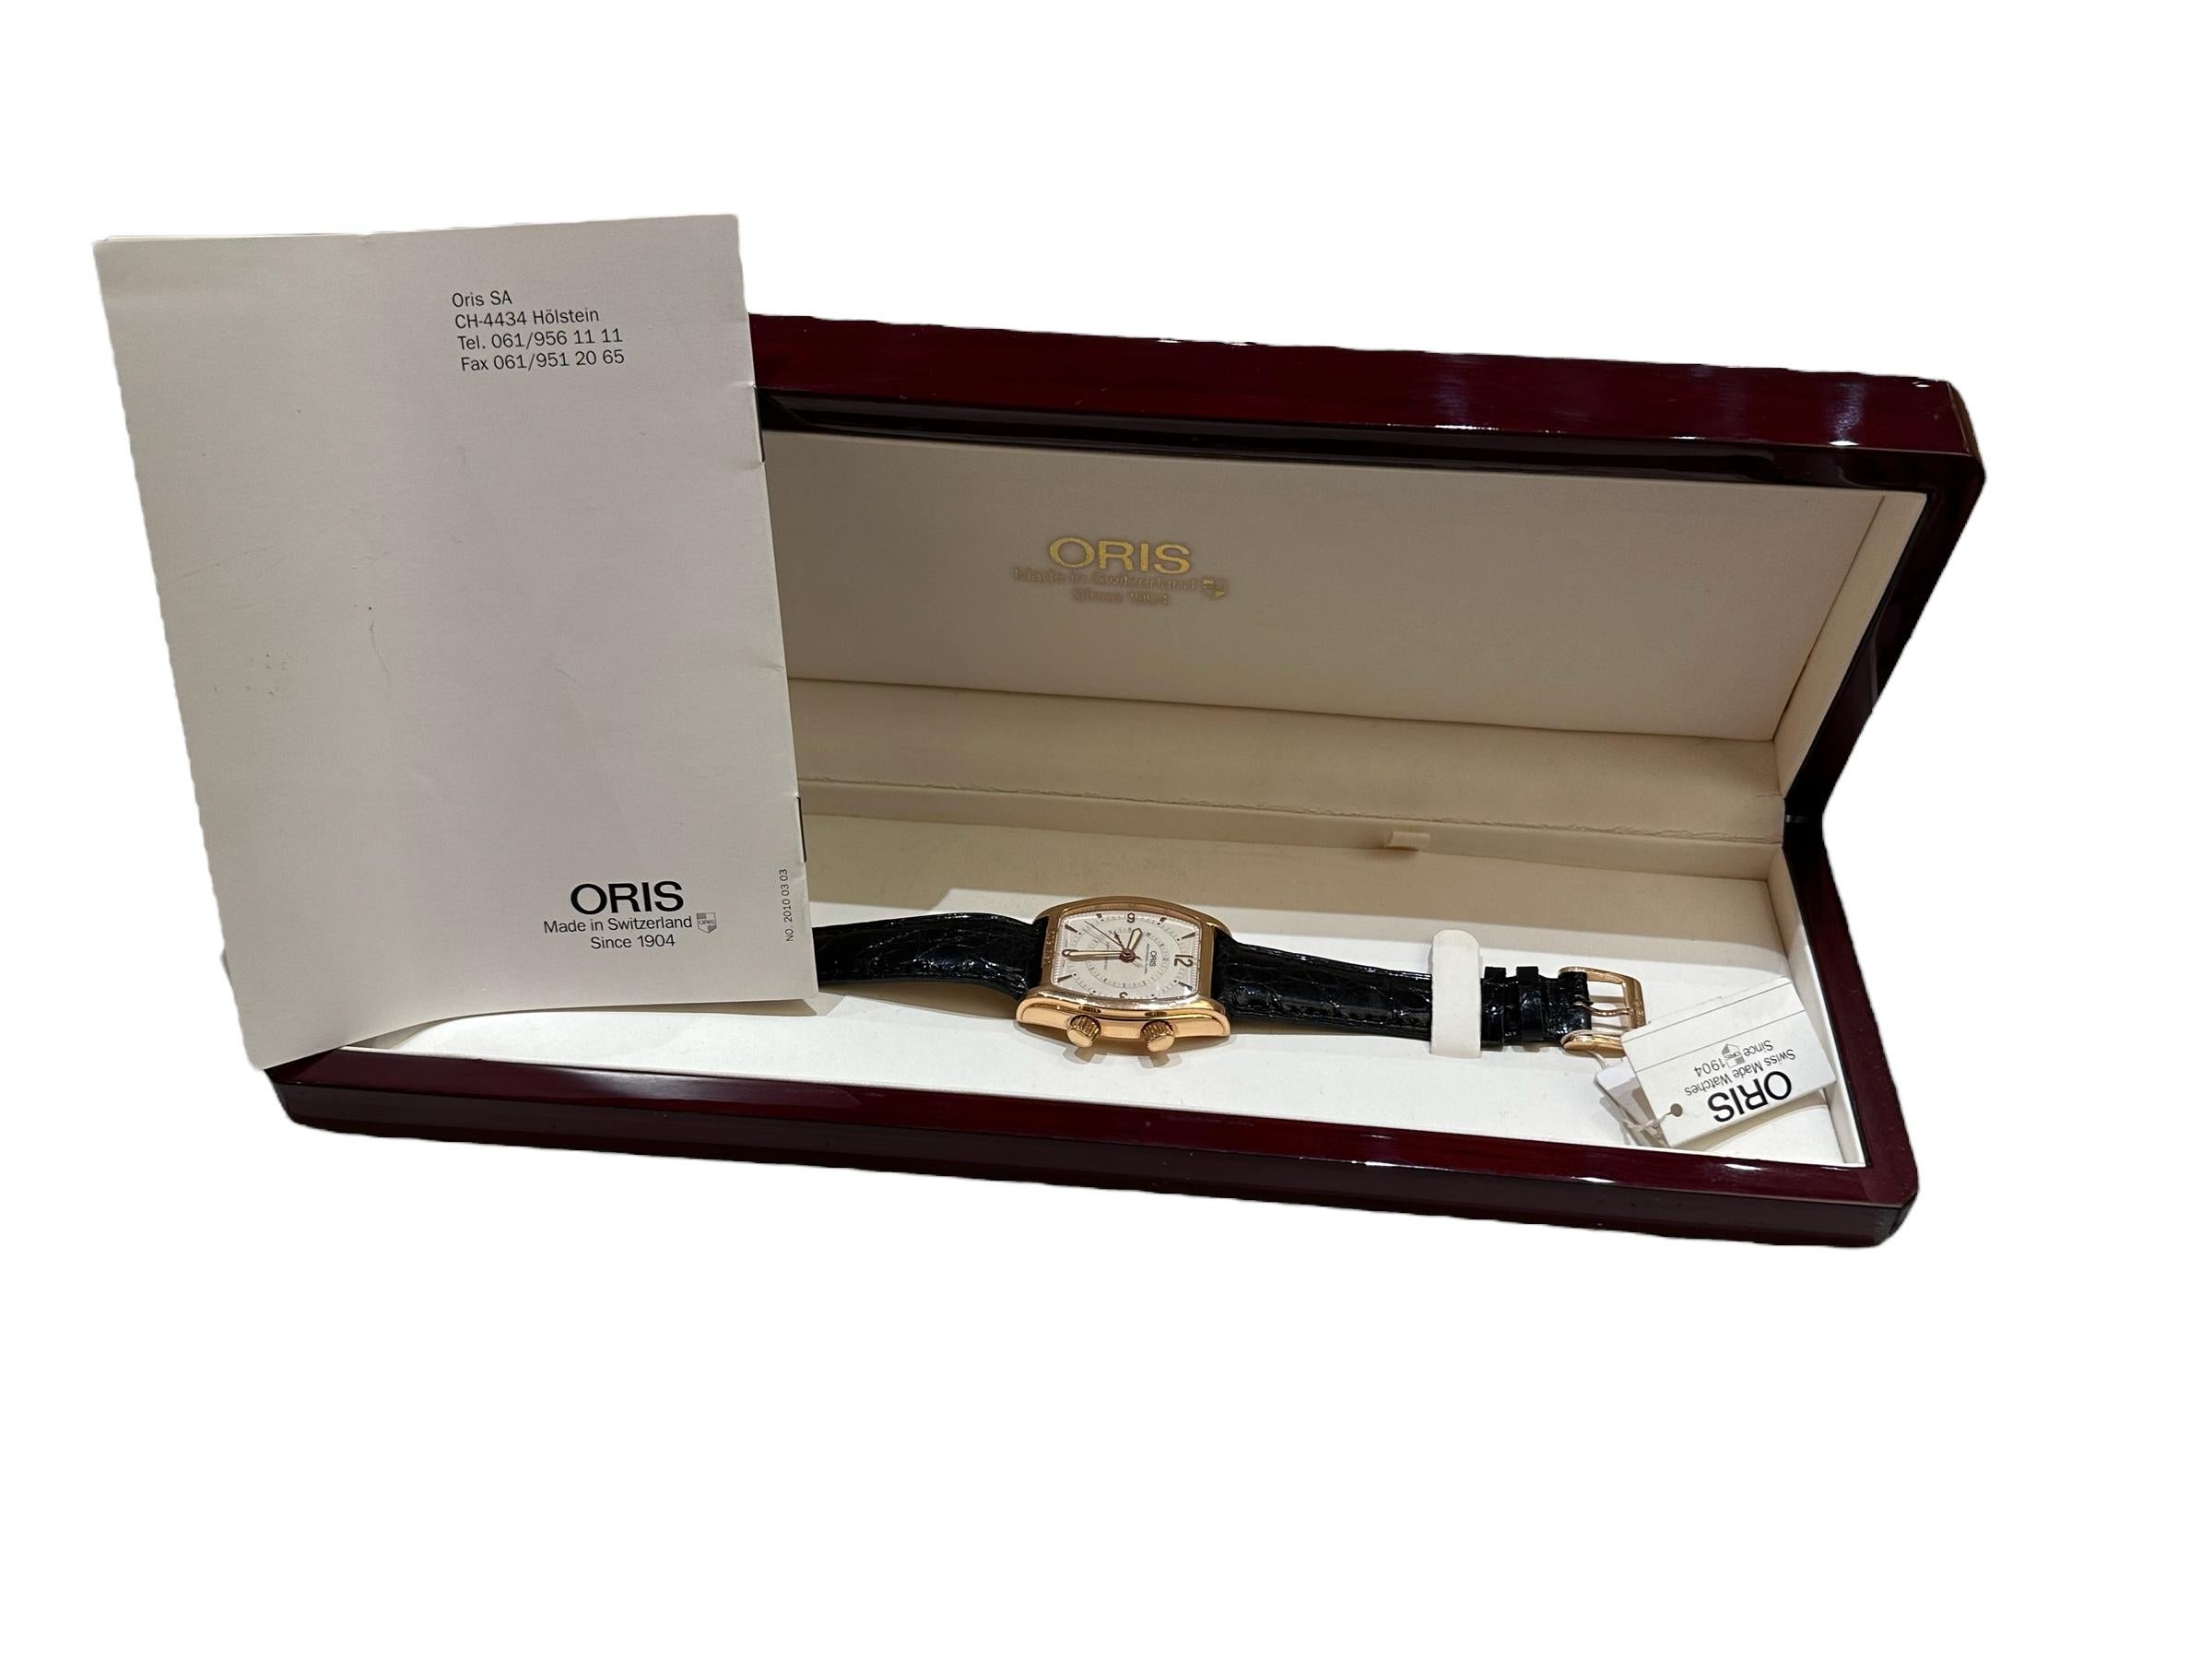 Oris Reveil Limited Edition Mechanical Alarm 18kt Gold, New with Box & Papers en vente 12